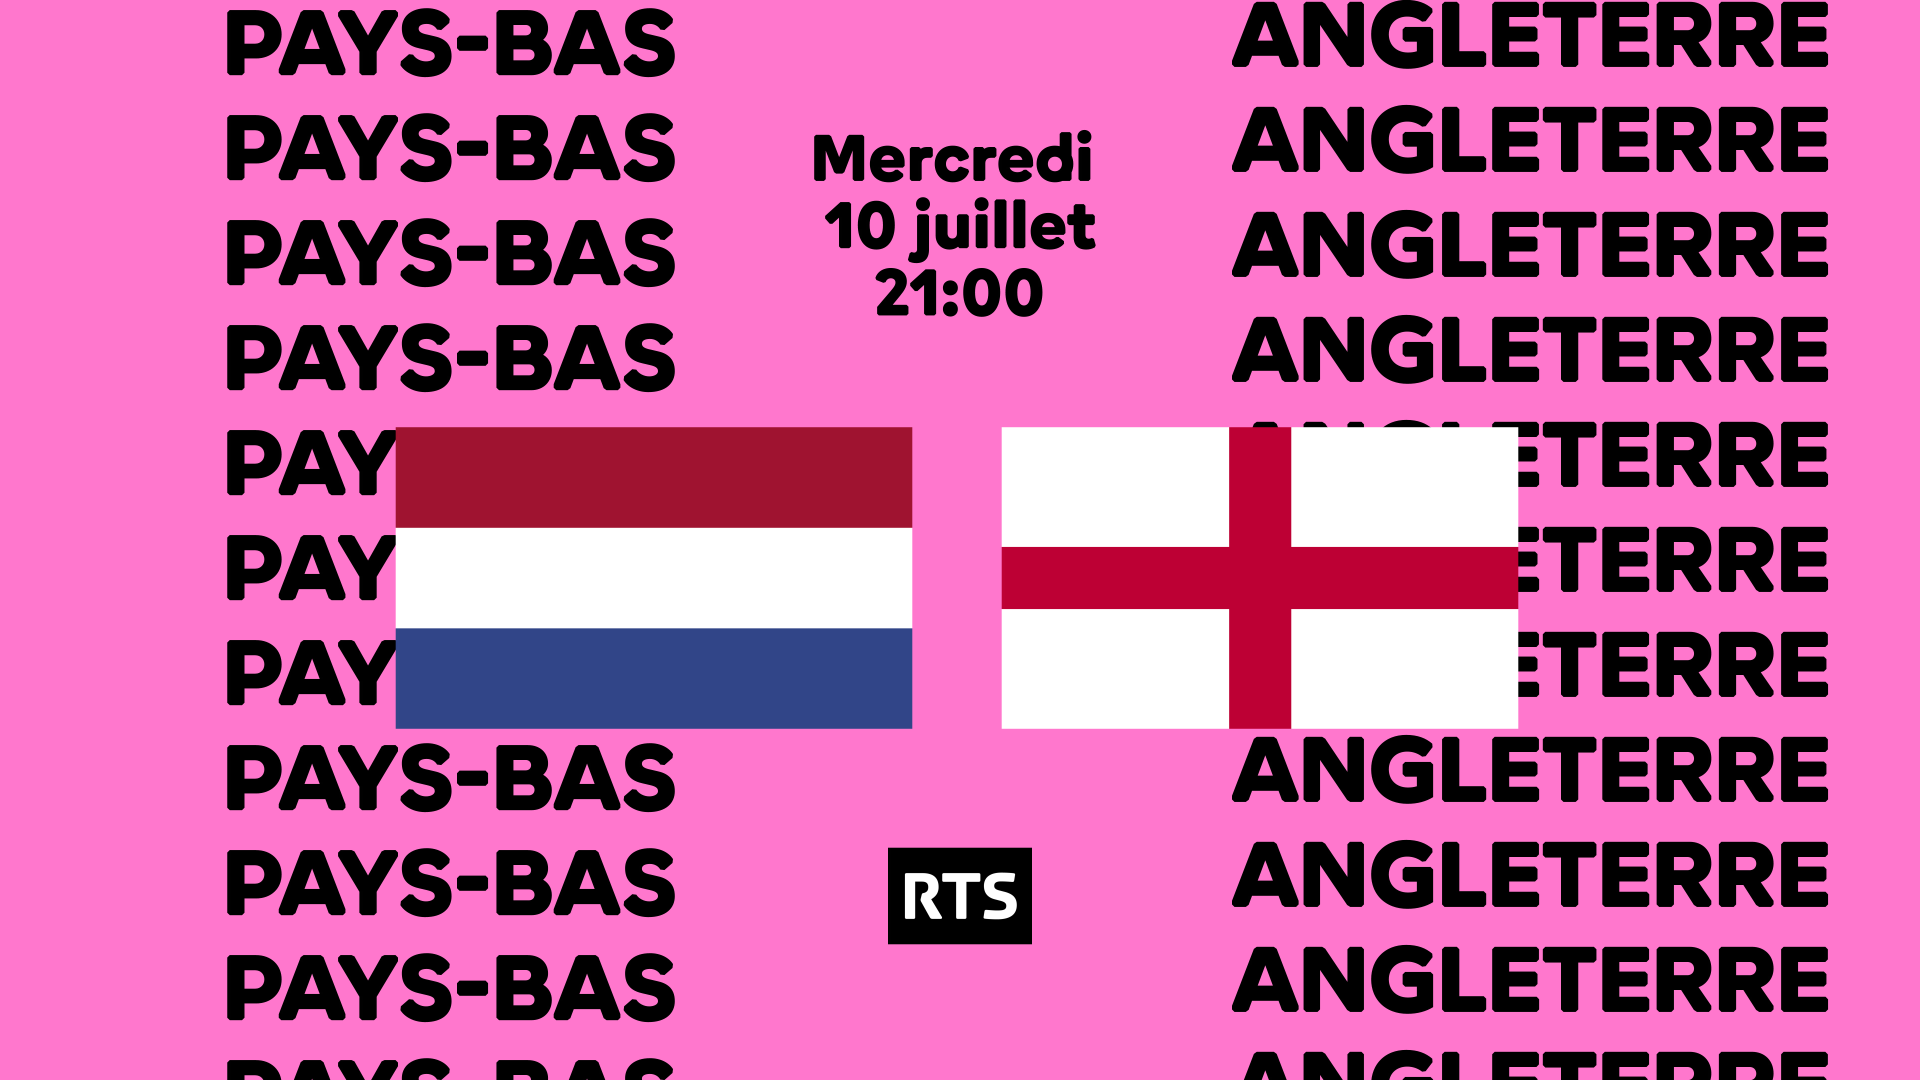 00_FOOTAISE_AFFICHE_Pays-Bas_Angleterre.png